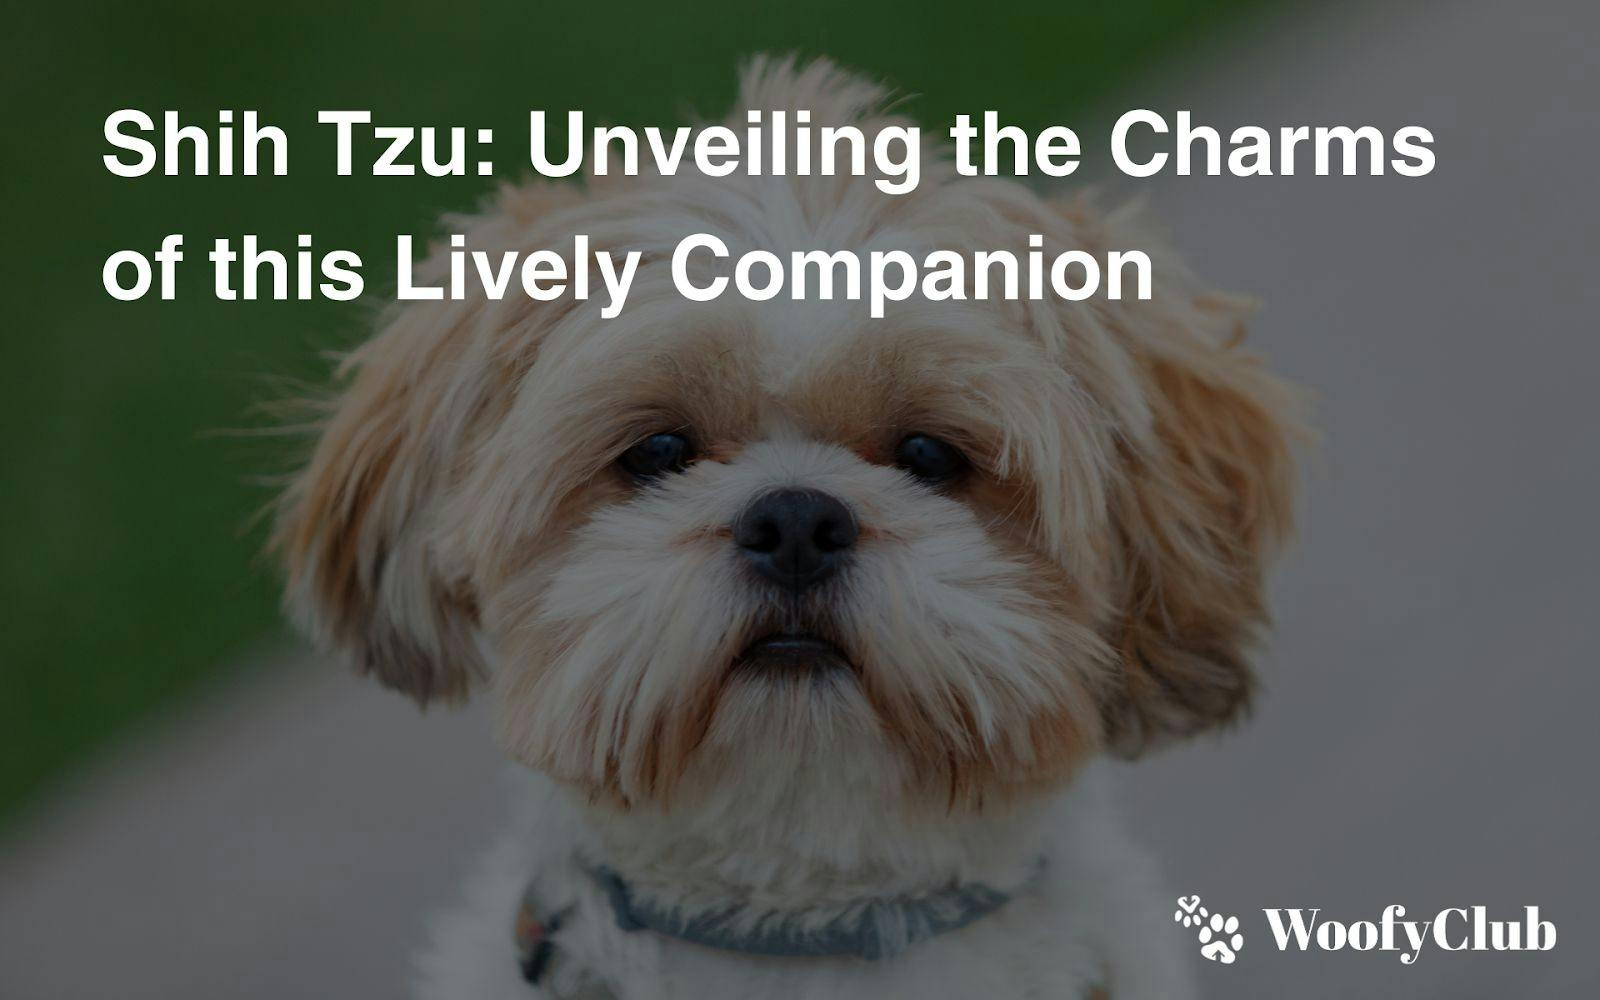 Shih Tzu: Unveiling The Charms Of This Lively Companion